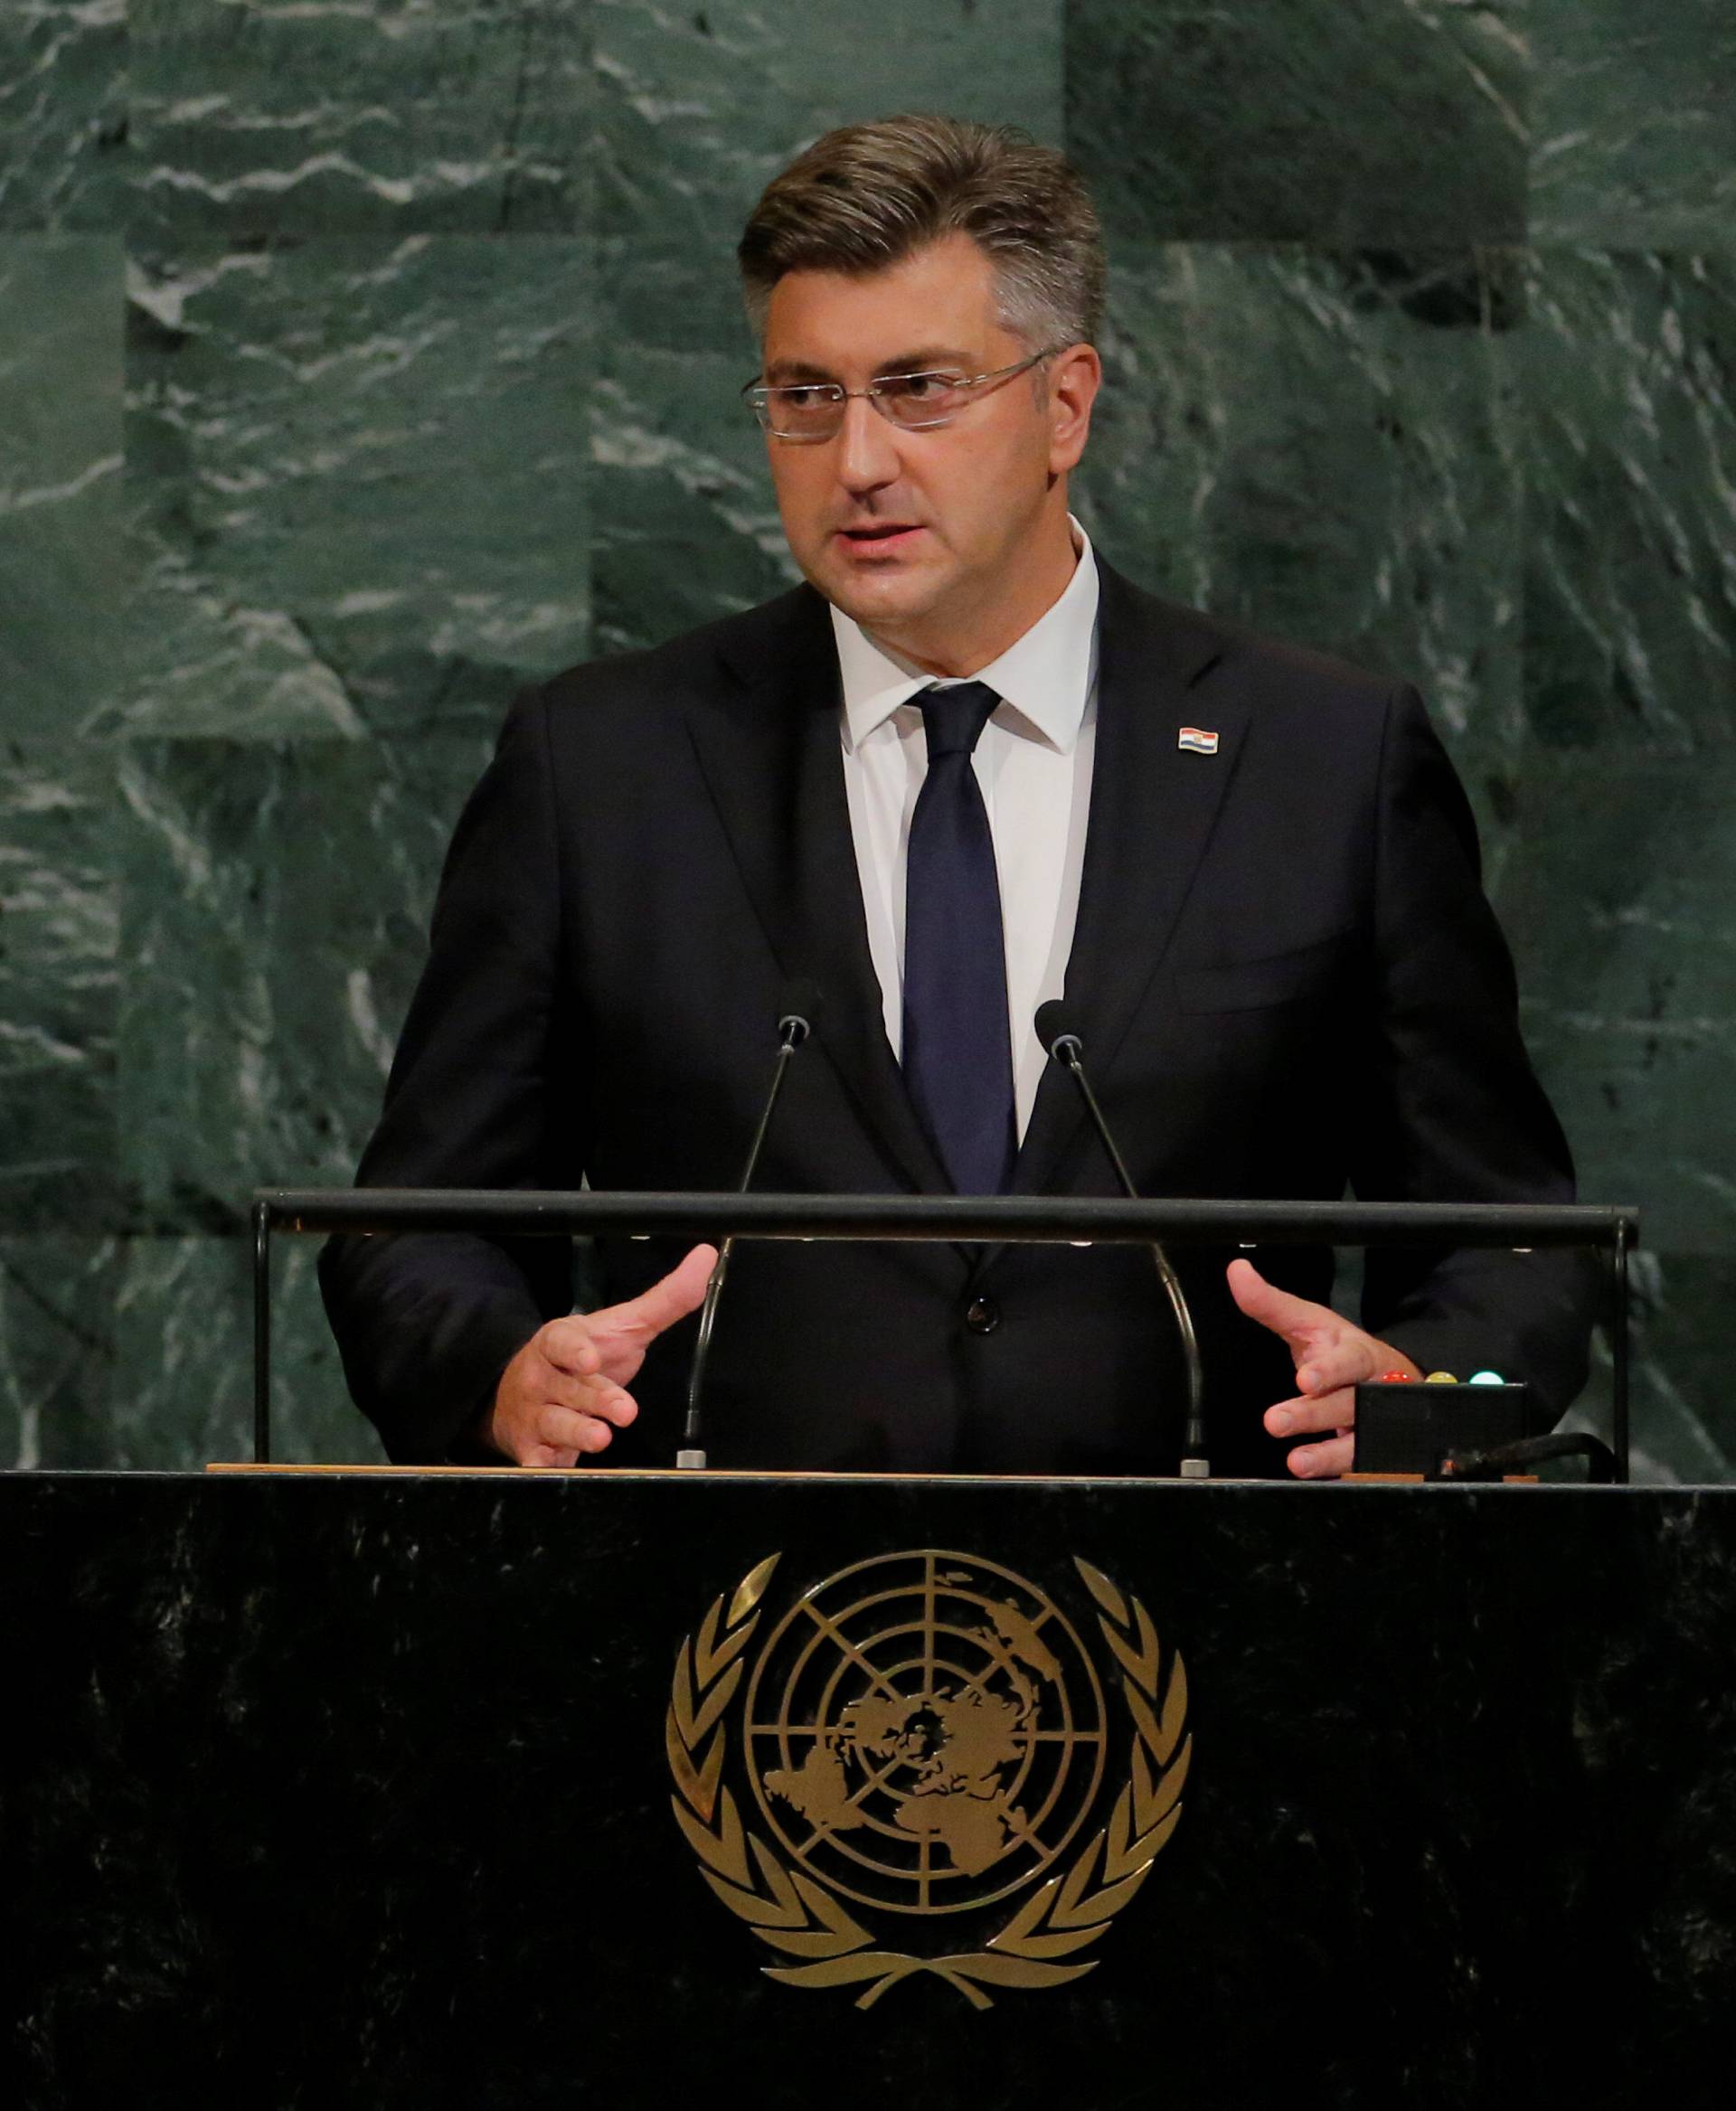 Croatian Prime Minister, Andrej Plenkovic, addresses the 72nd United Nations General Assembly at U.N. headquarters in New York